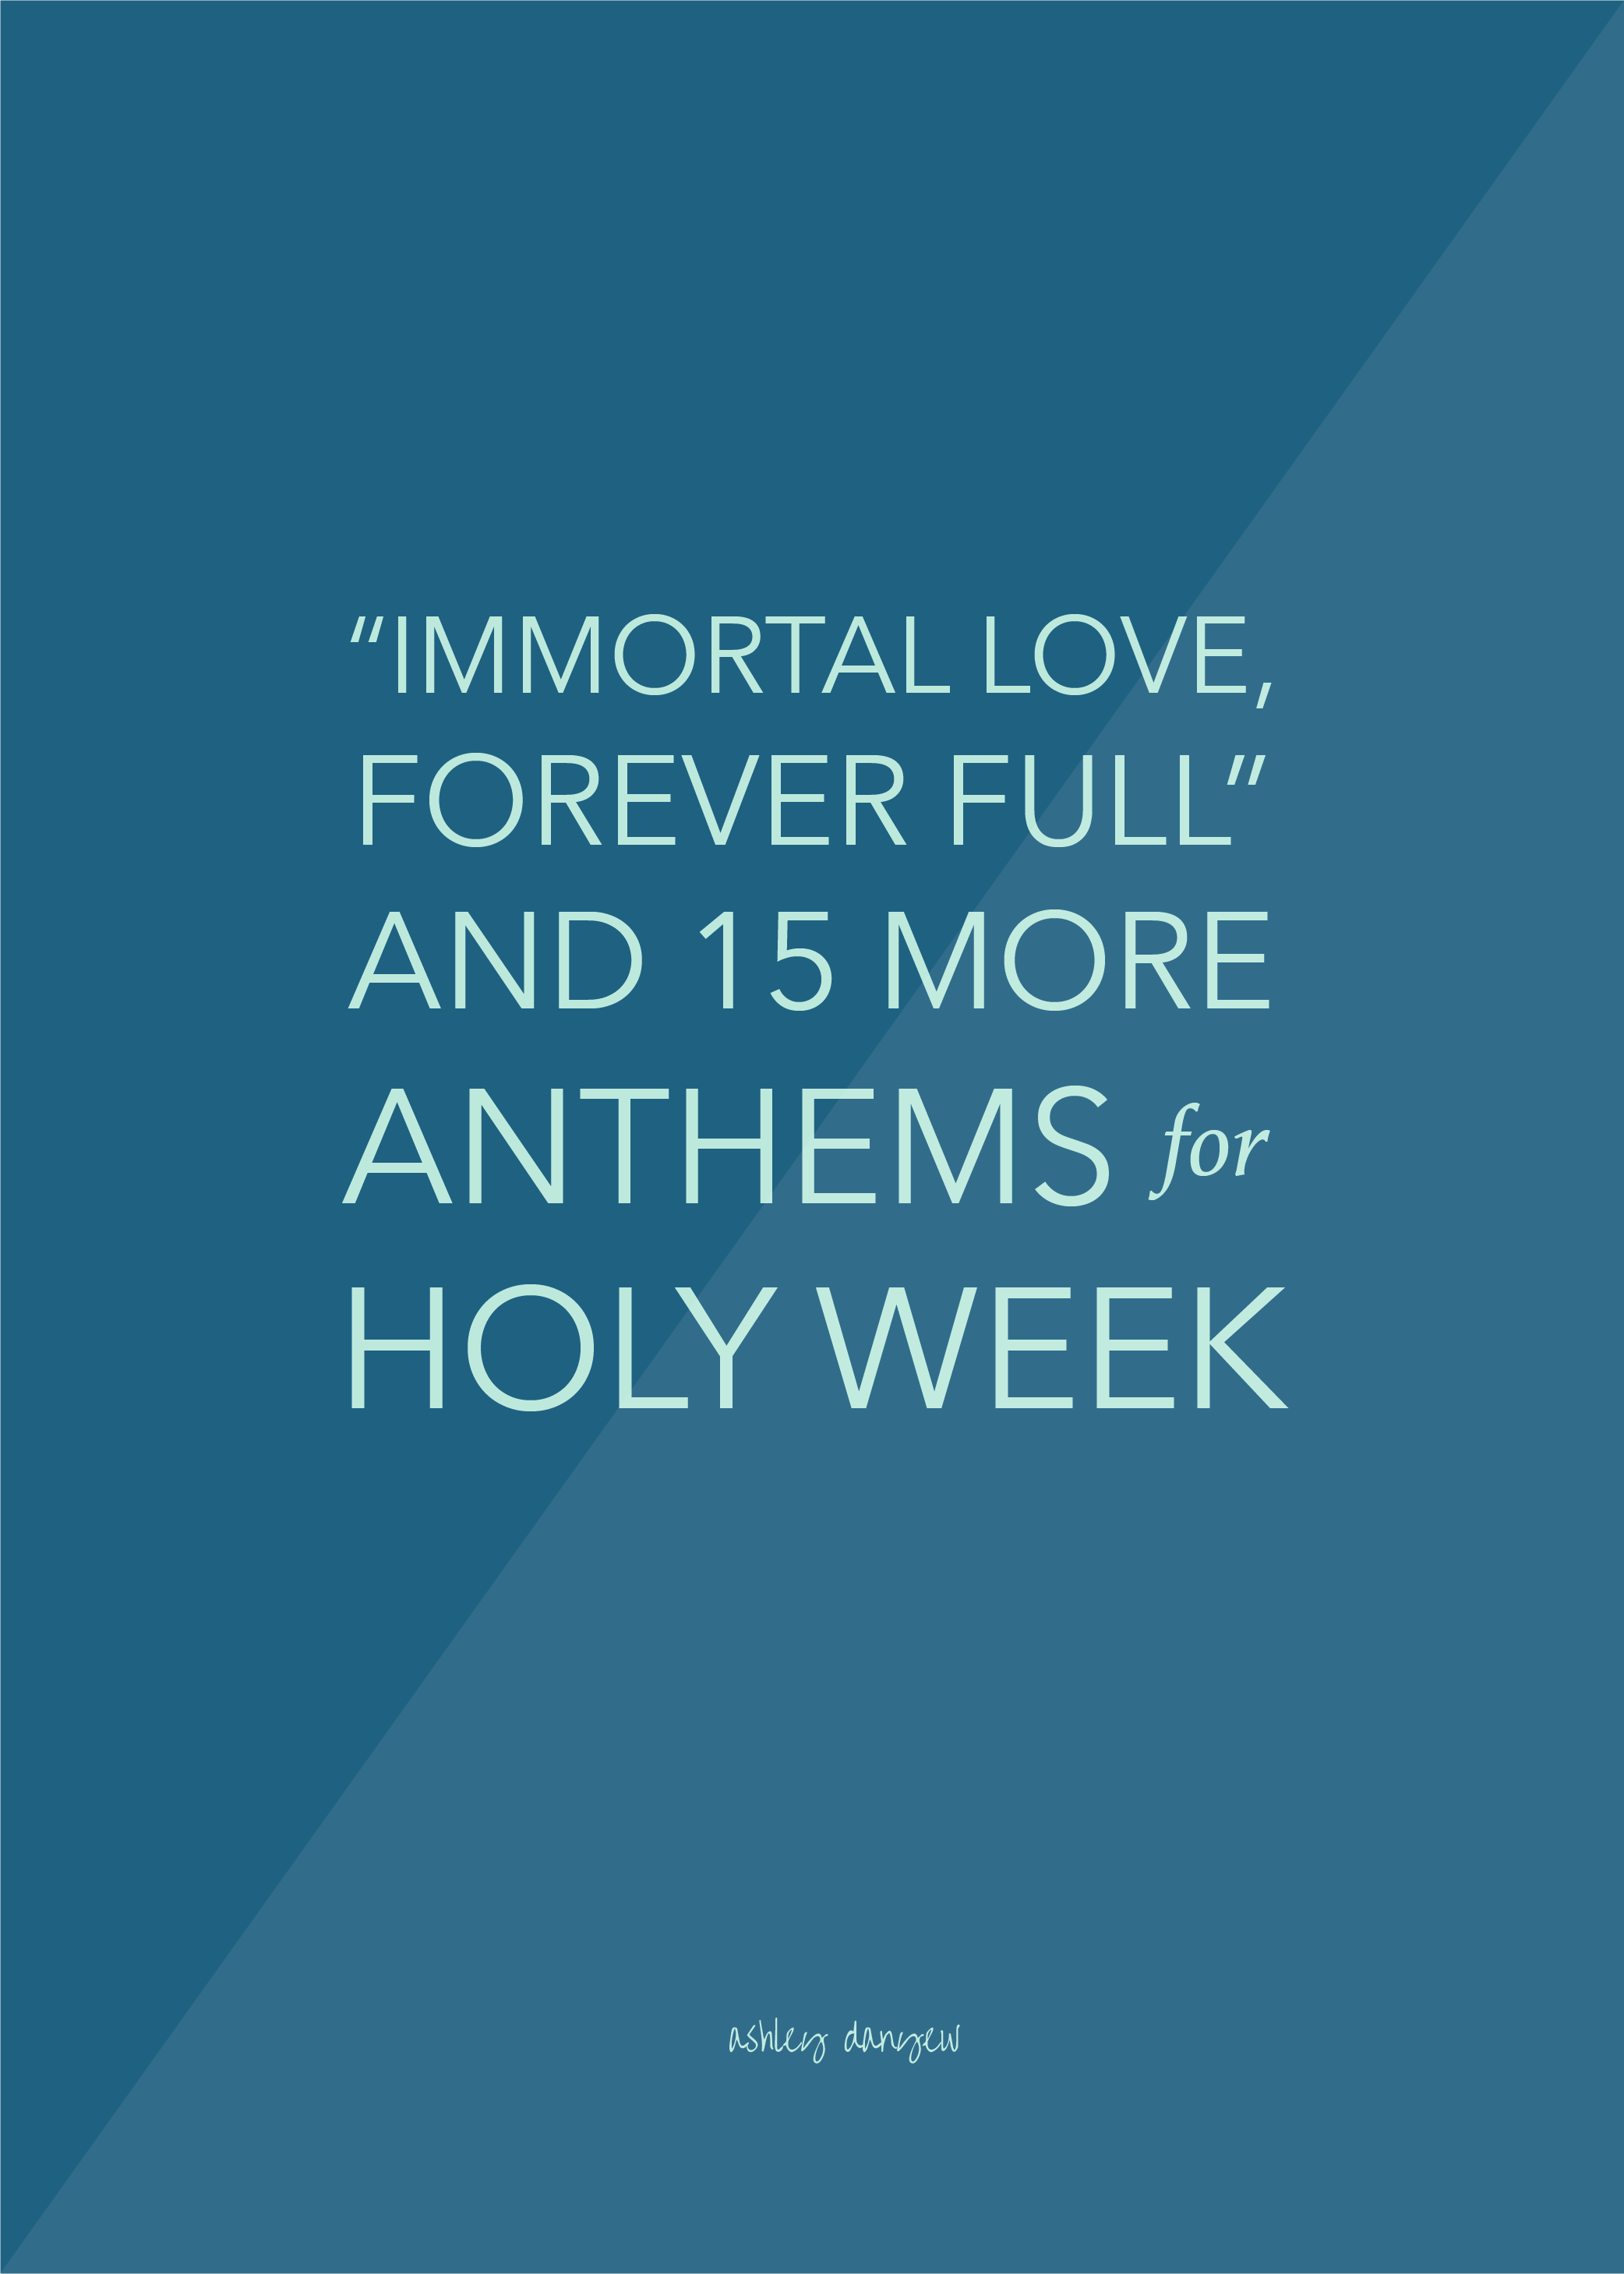 Immortal Love, Forever Full and 15 More Anthems for Holy Week-06.png